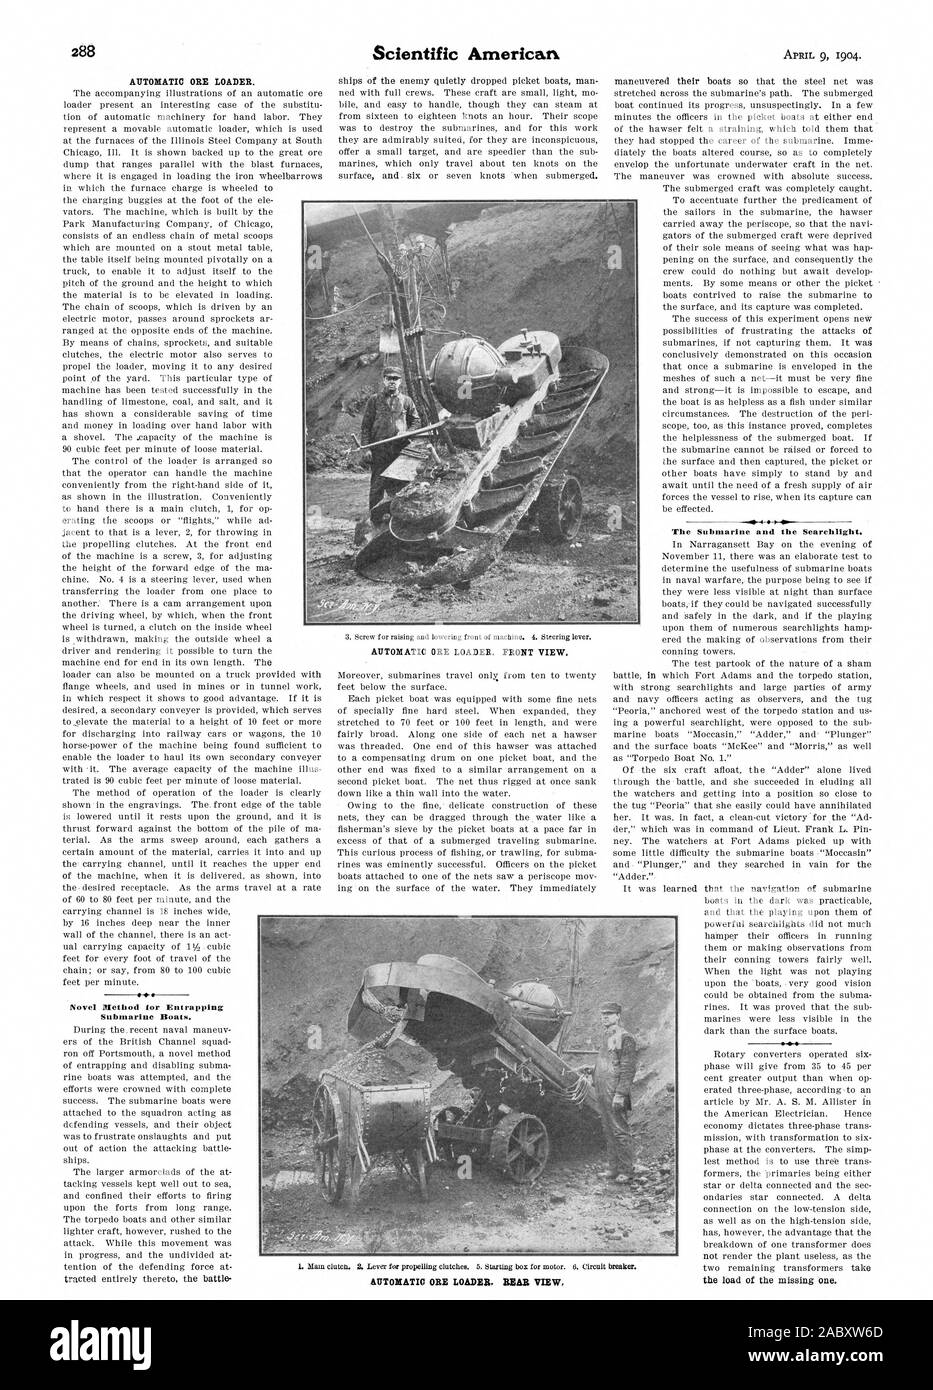 Novel Method tor Entrapping Submarine Boats. The Submarine and the Searchlight., scientific american, 1904-04-09 Stock Photo